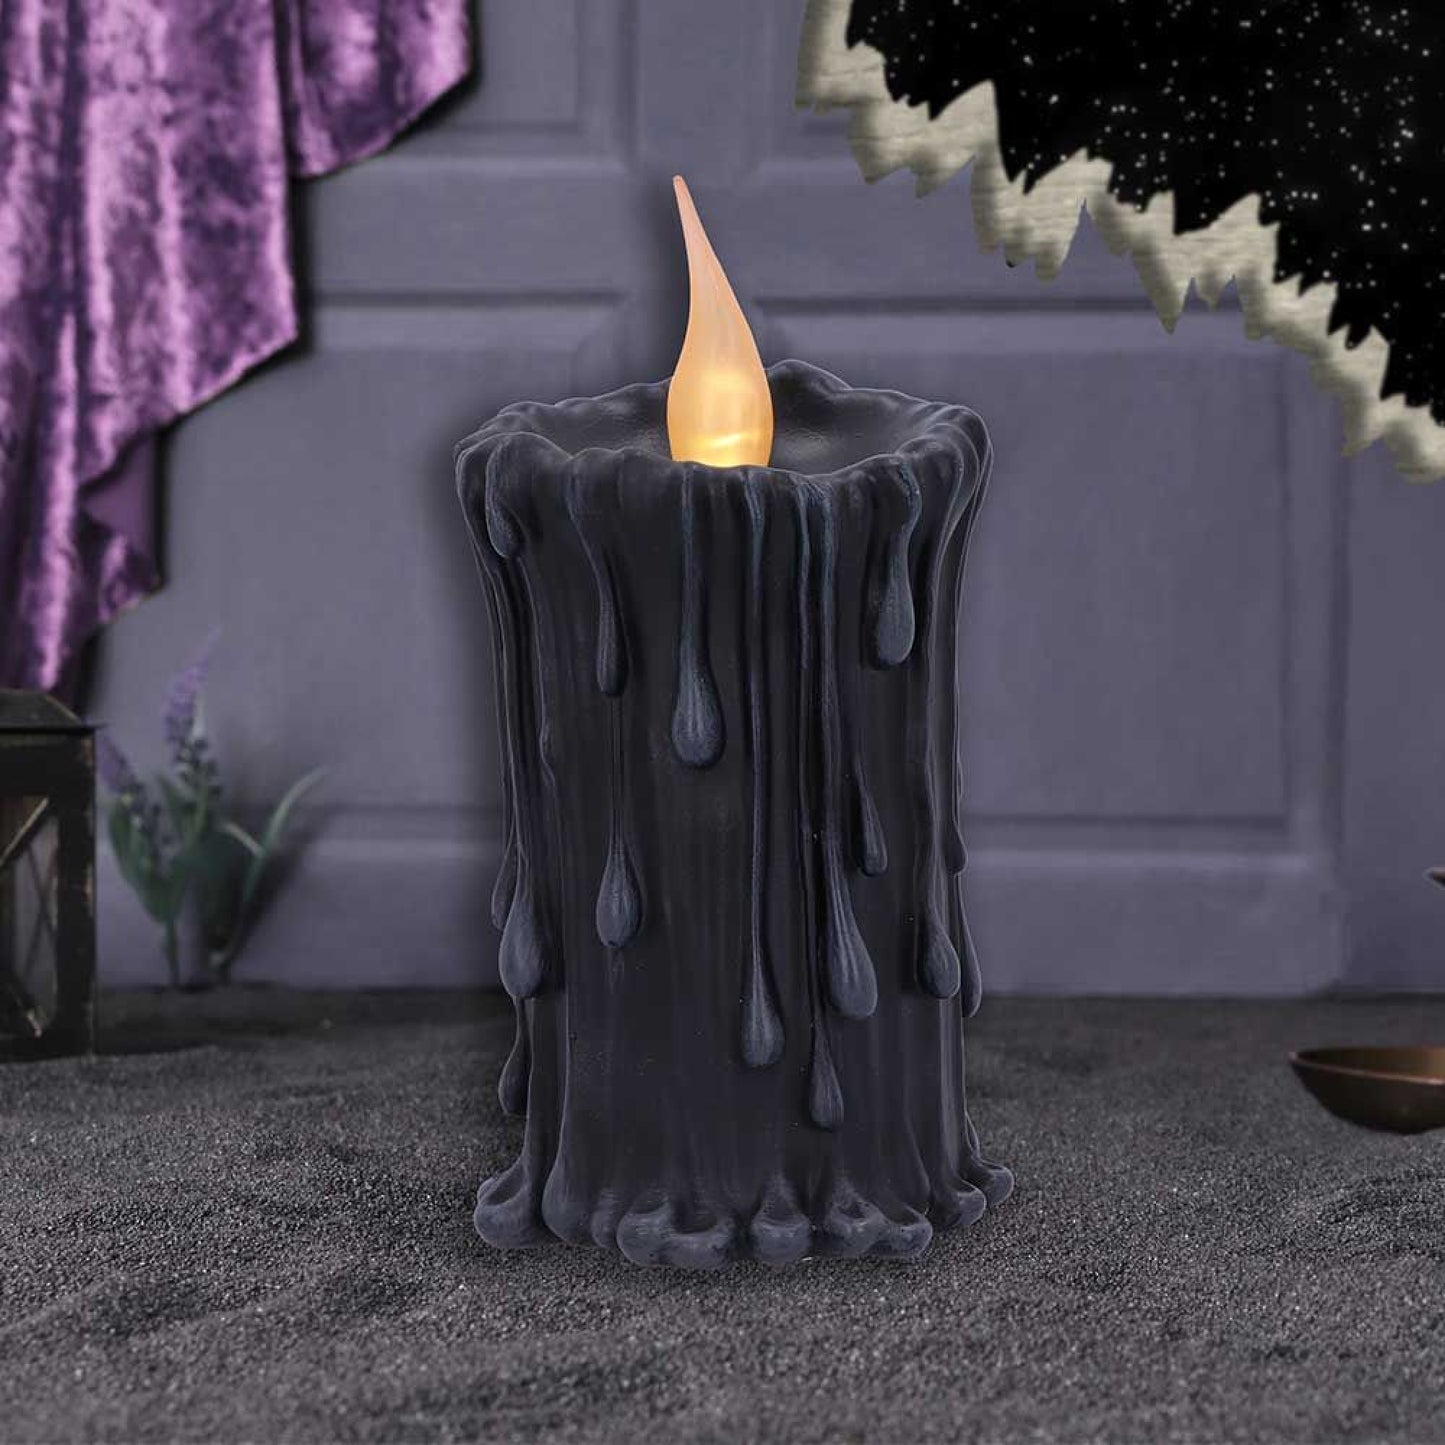 The candle shaped piece, painted in black, imitates a traditional candle, complete with bleeding wax that appears to melt down its sides.  At the top of the candle, there is an LED flame that, when switched on, creates a life like flickering light. Size 18.8cm.